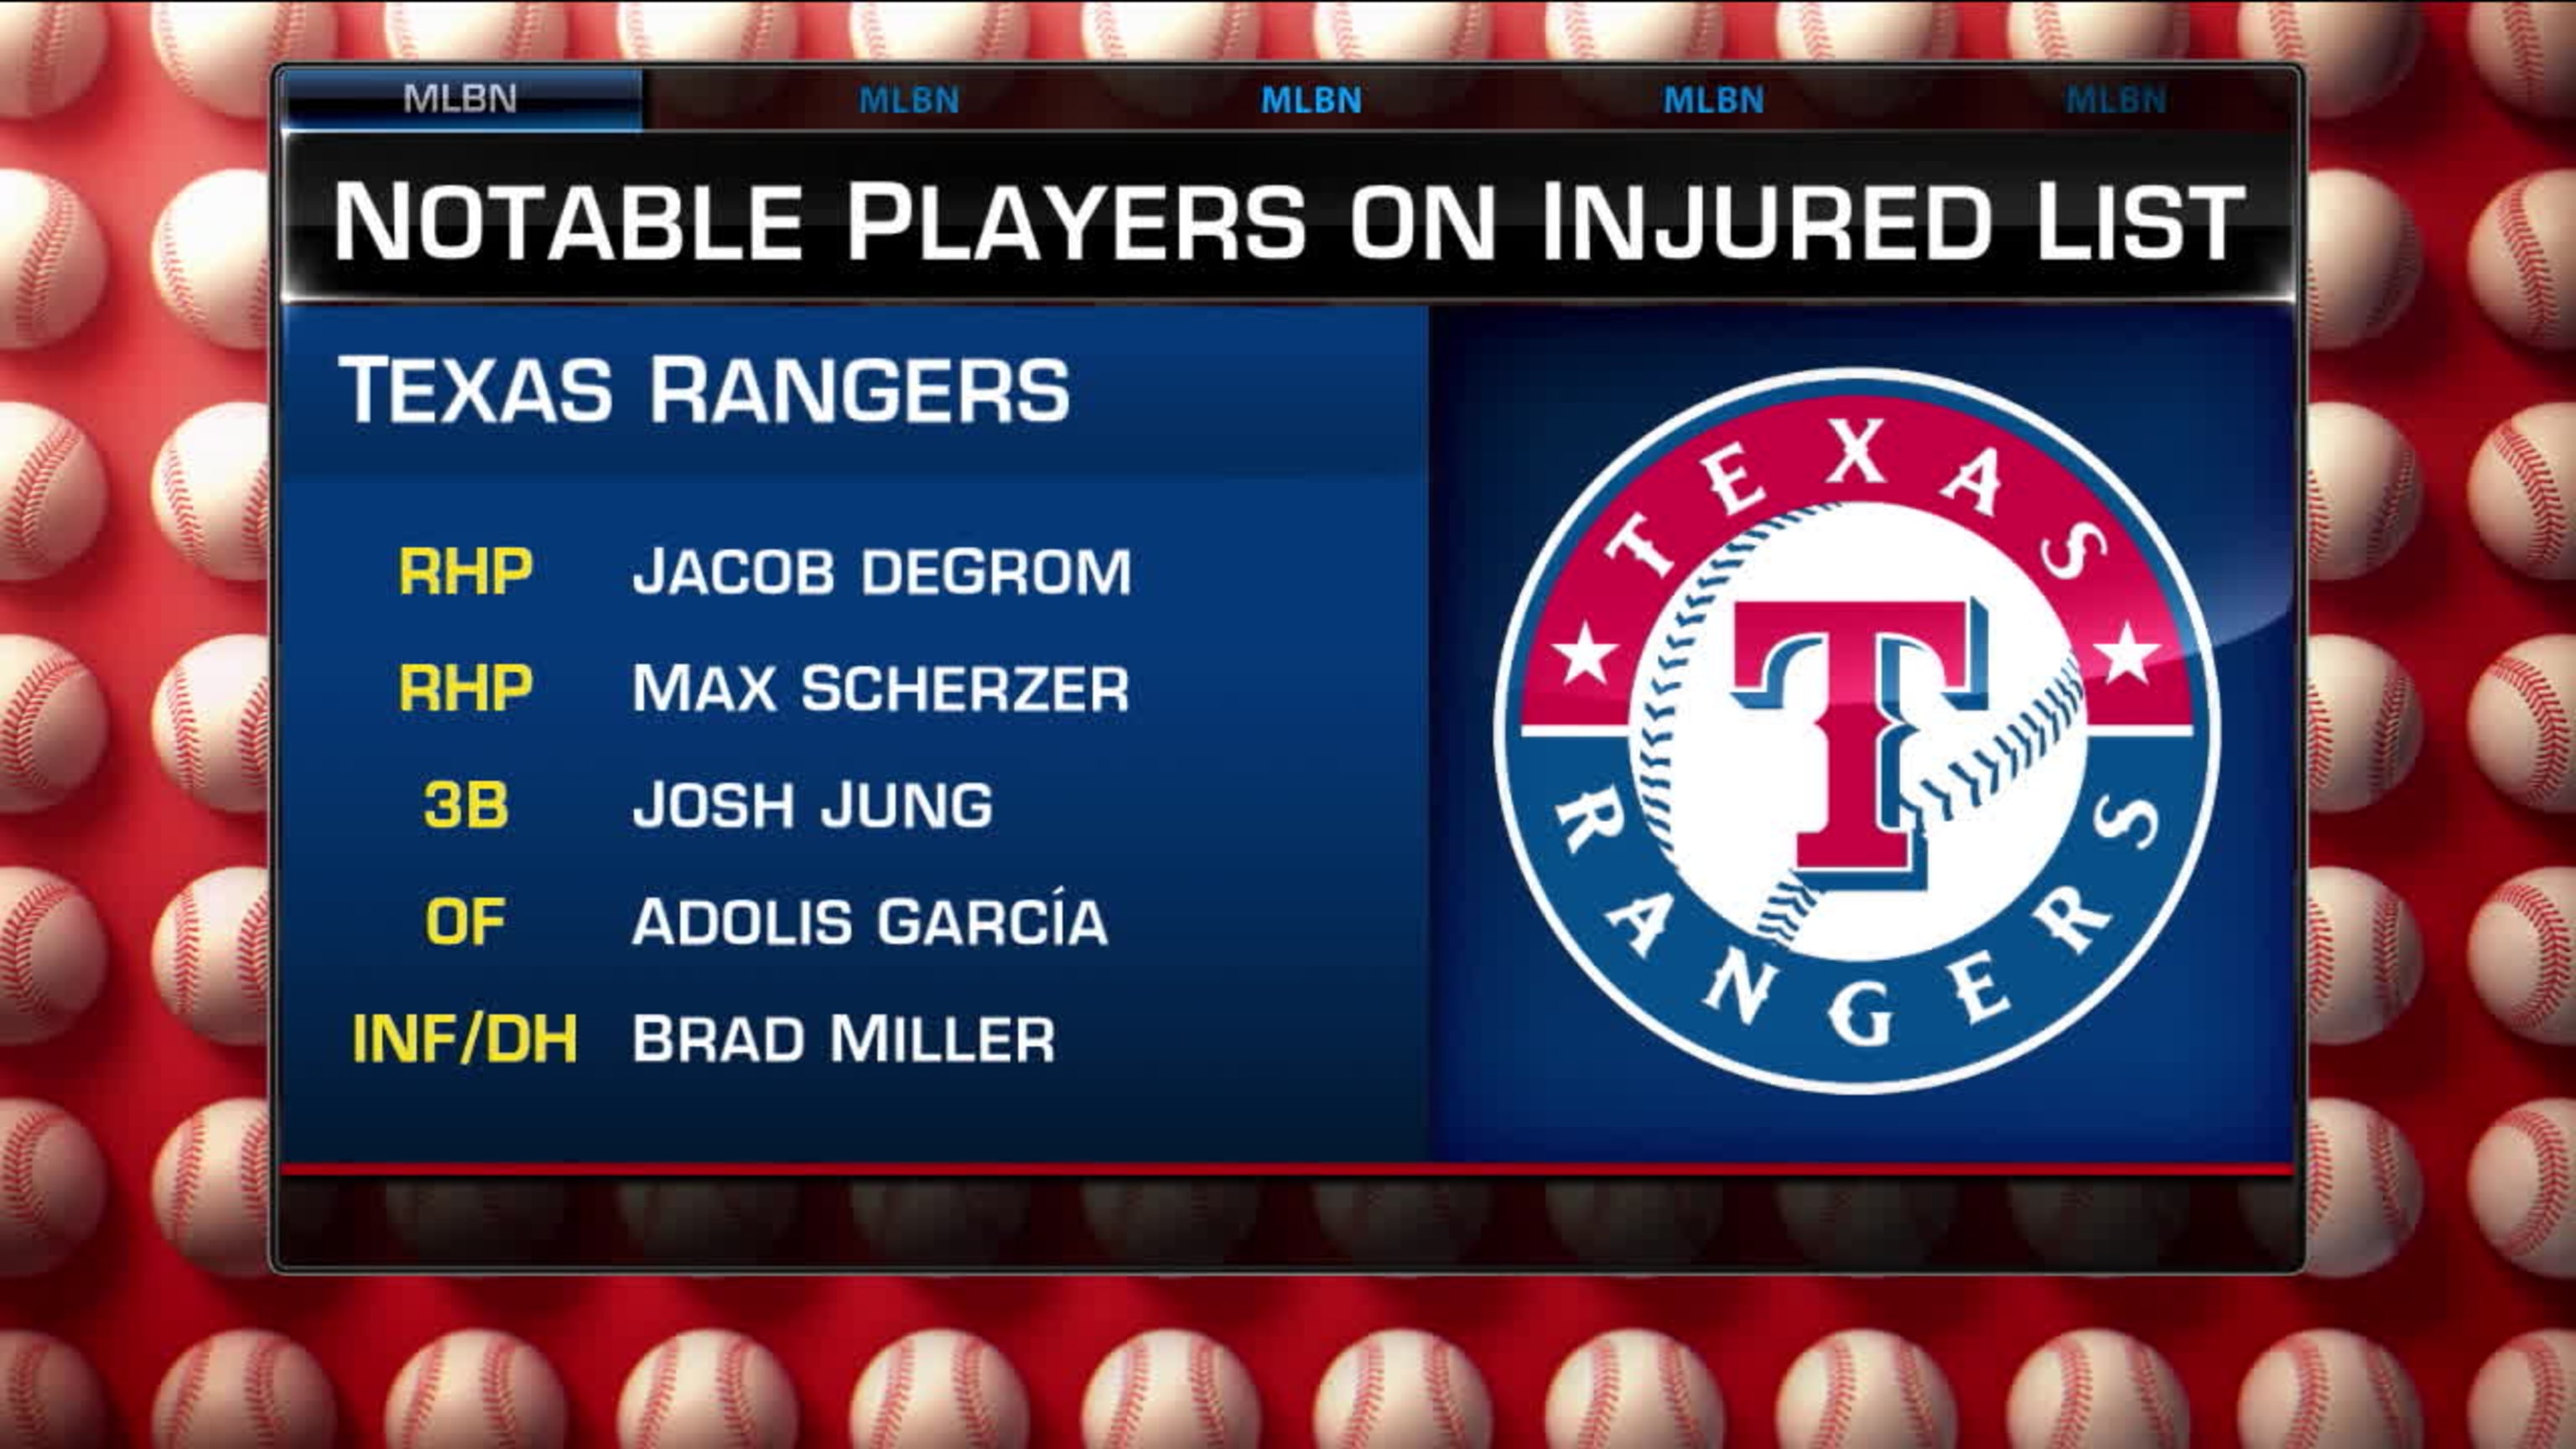 What injury ended Max Scherzer's season for the Rangers?